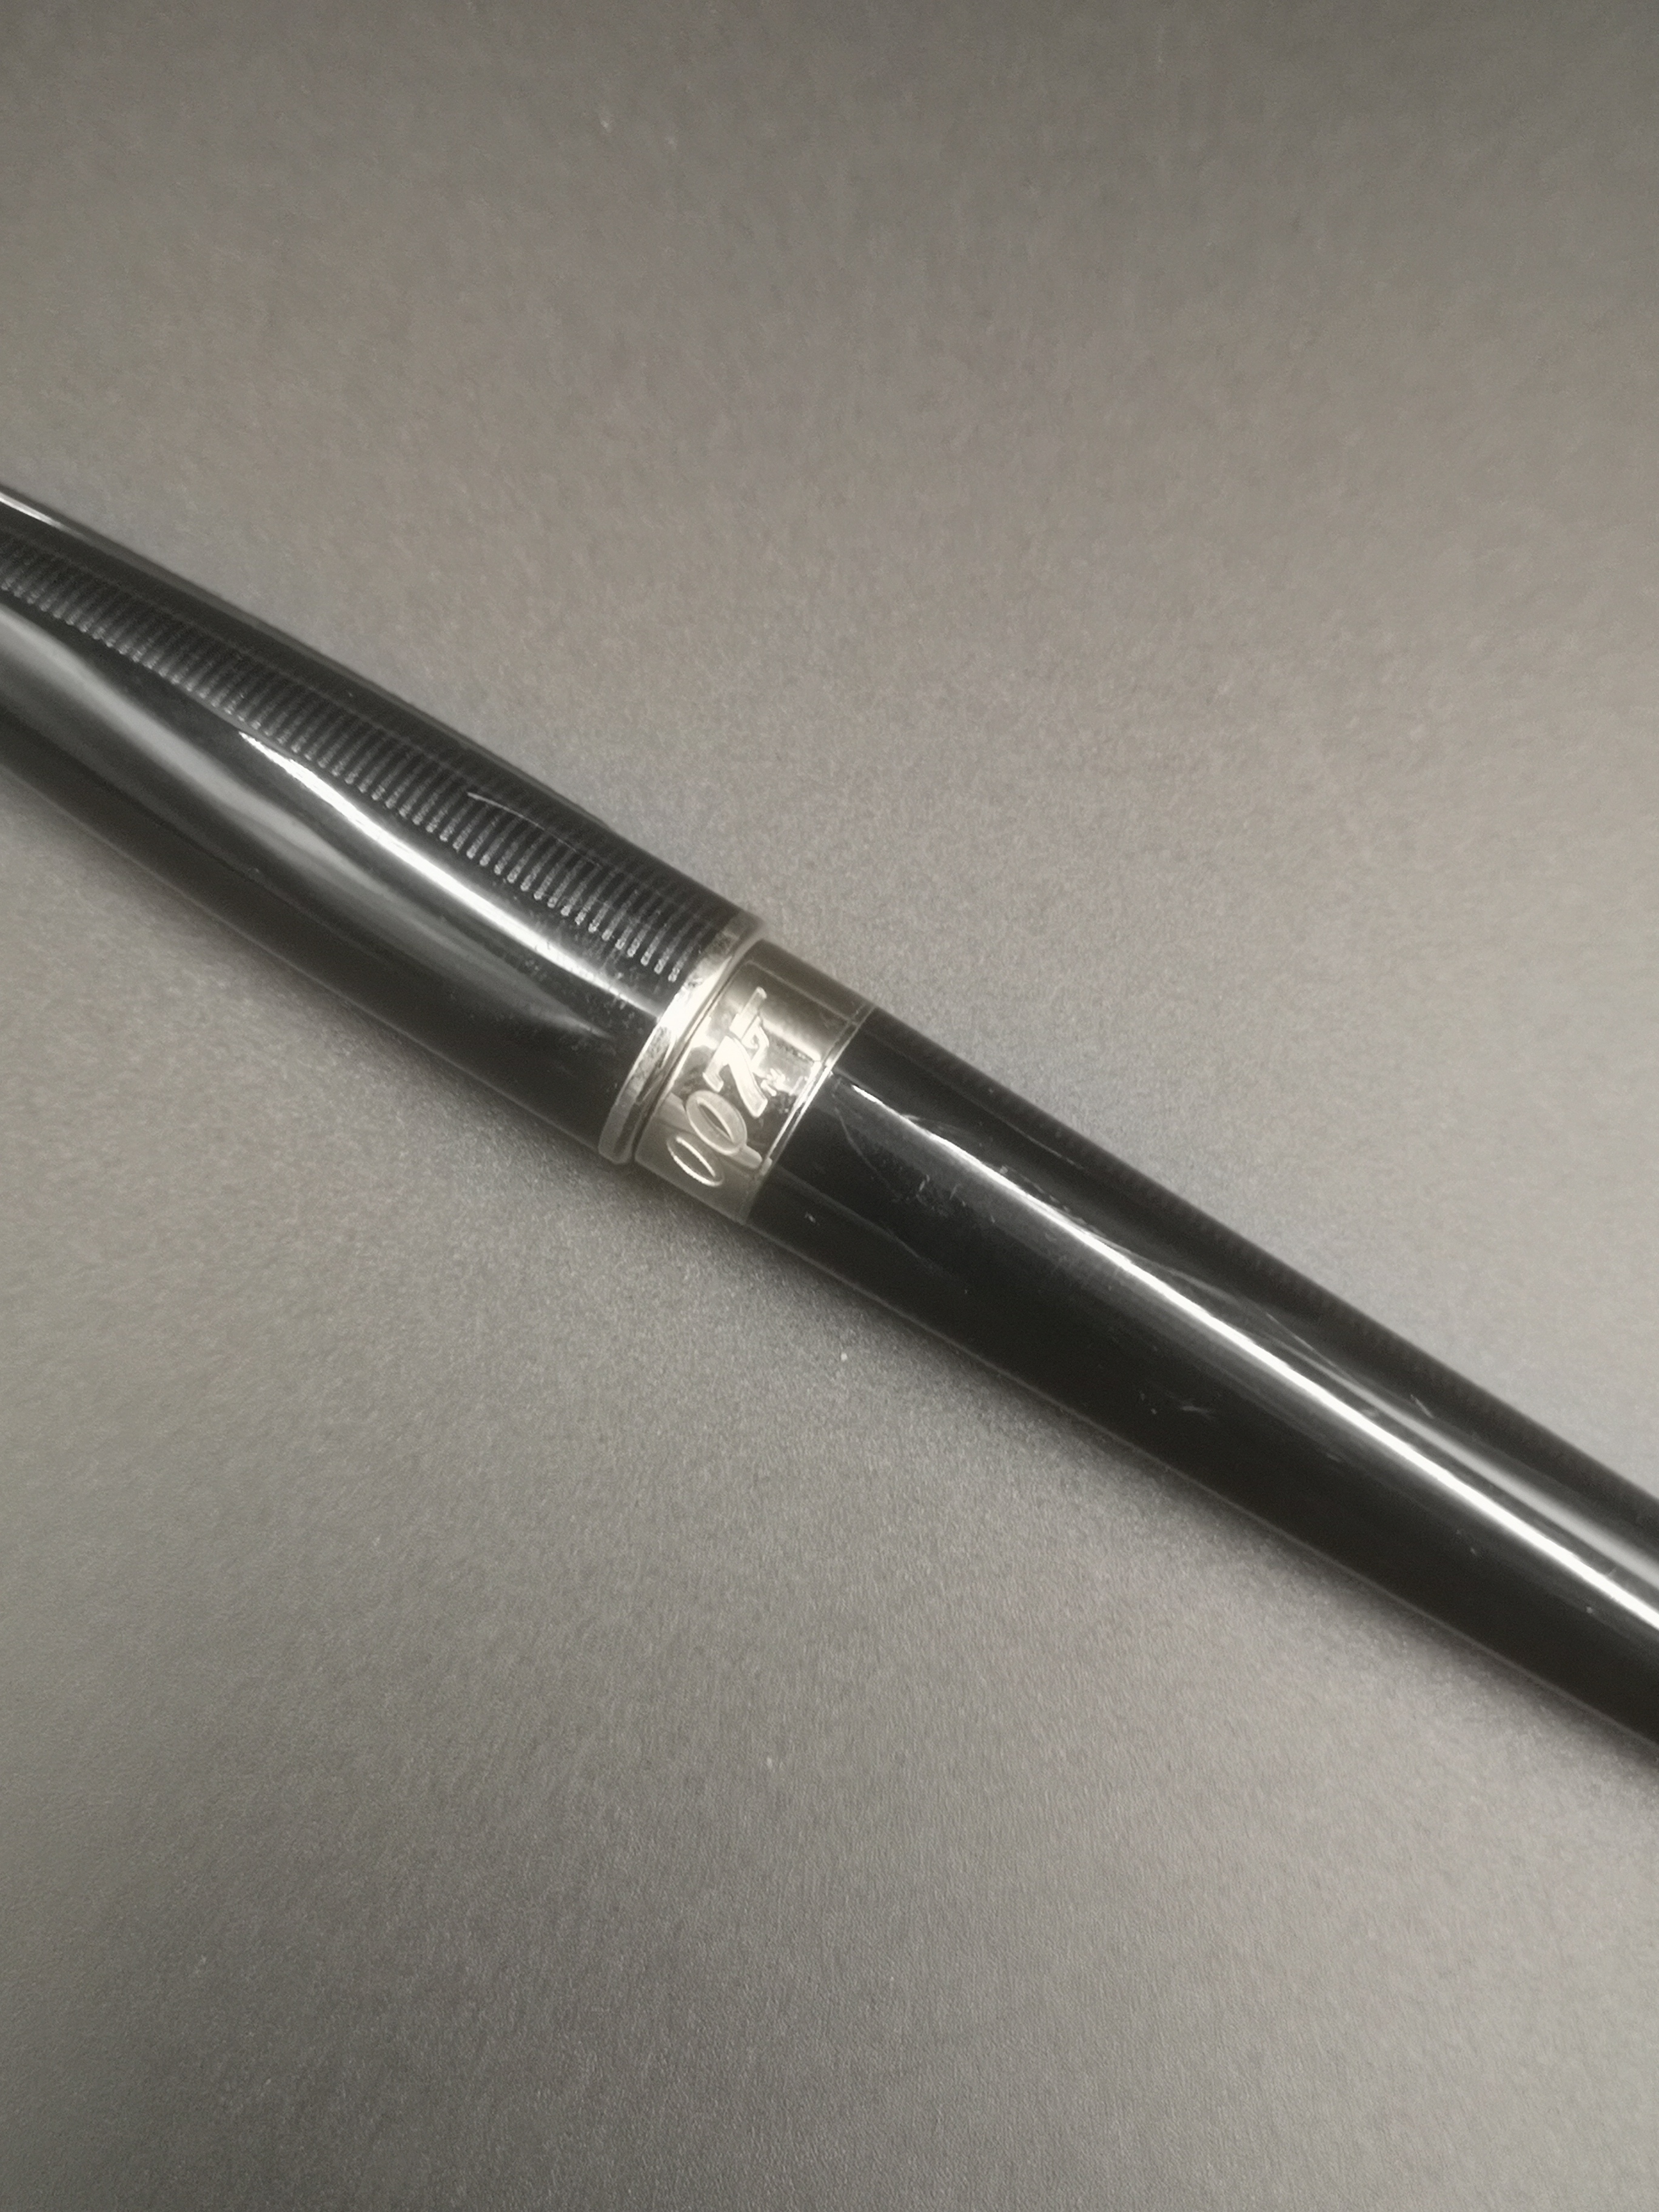 S. T. Dupont 007 fountain pen - Image 2 of 5